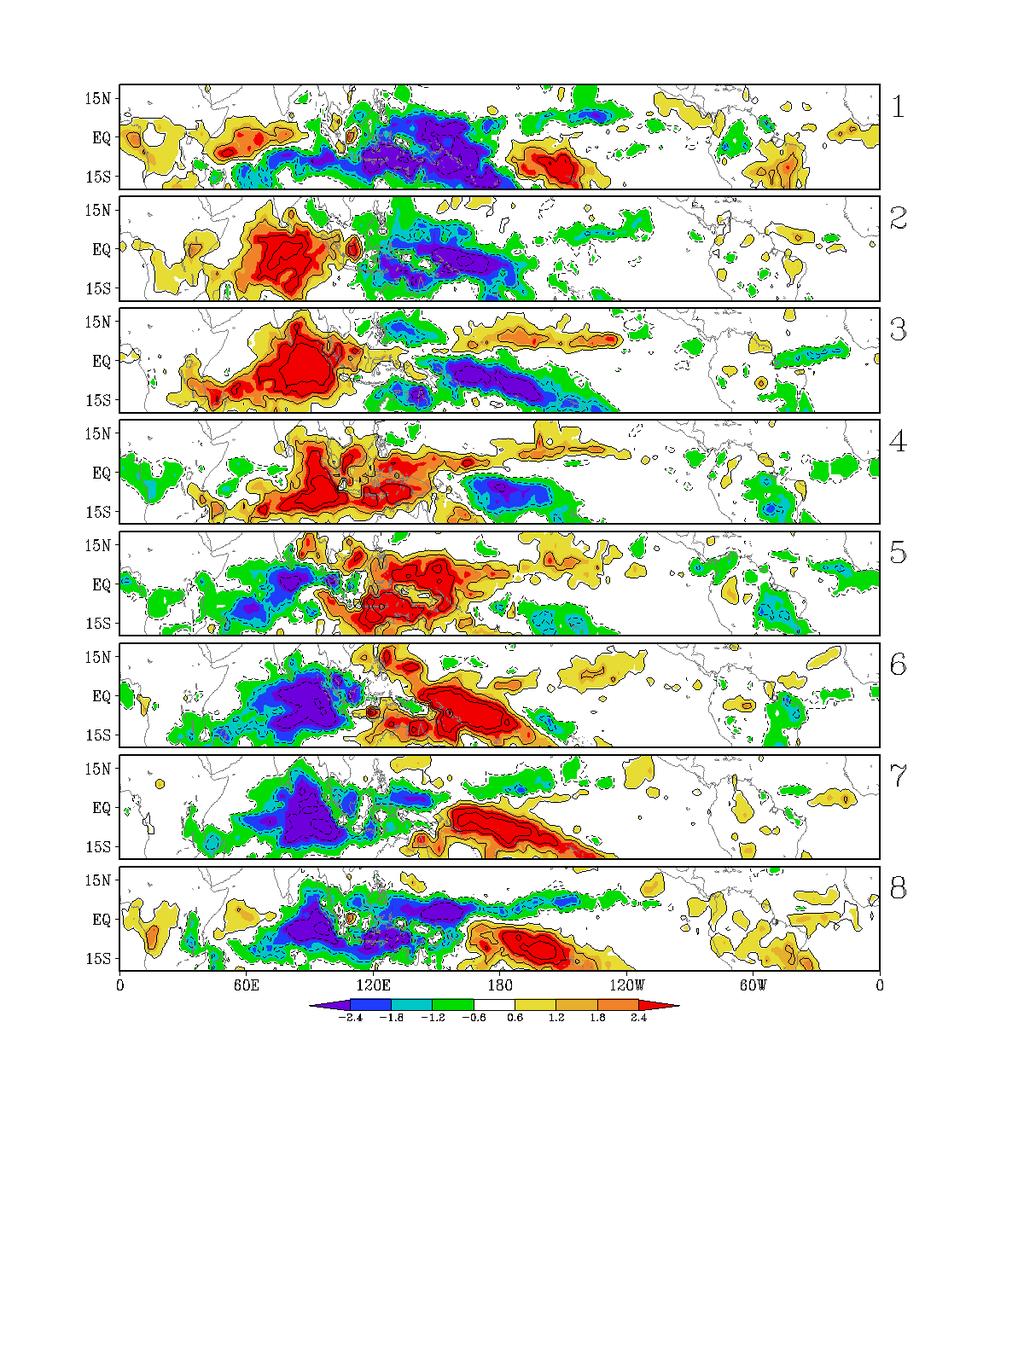 posites of tropical ipitation rate for 8 MJO es,